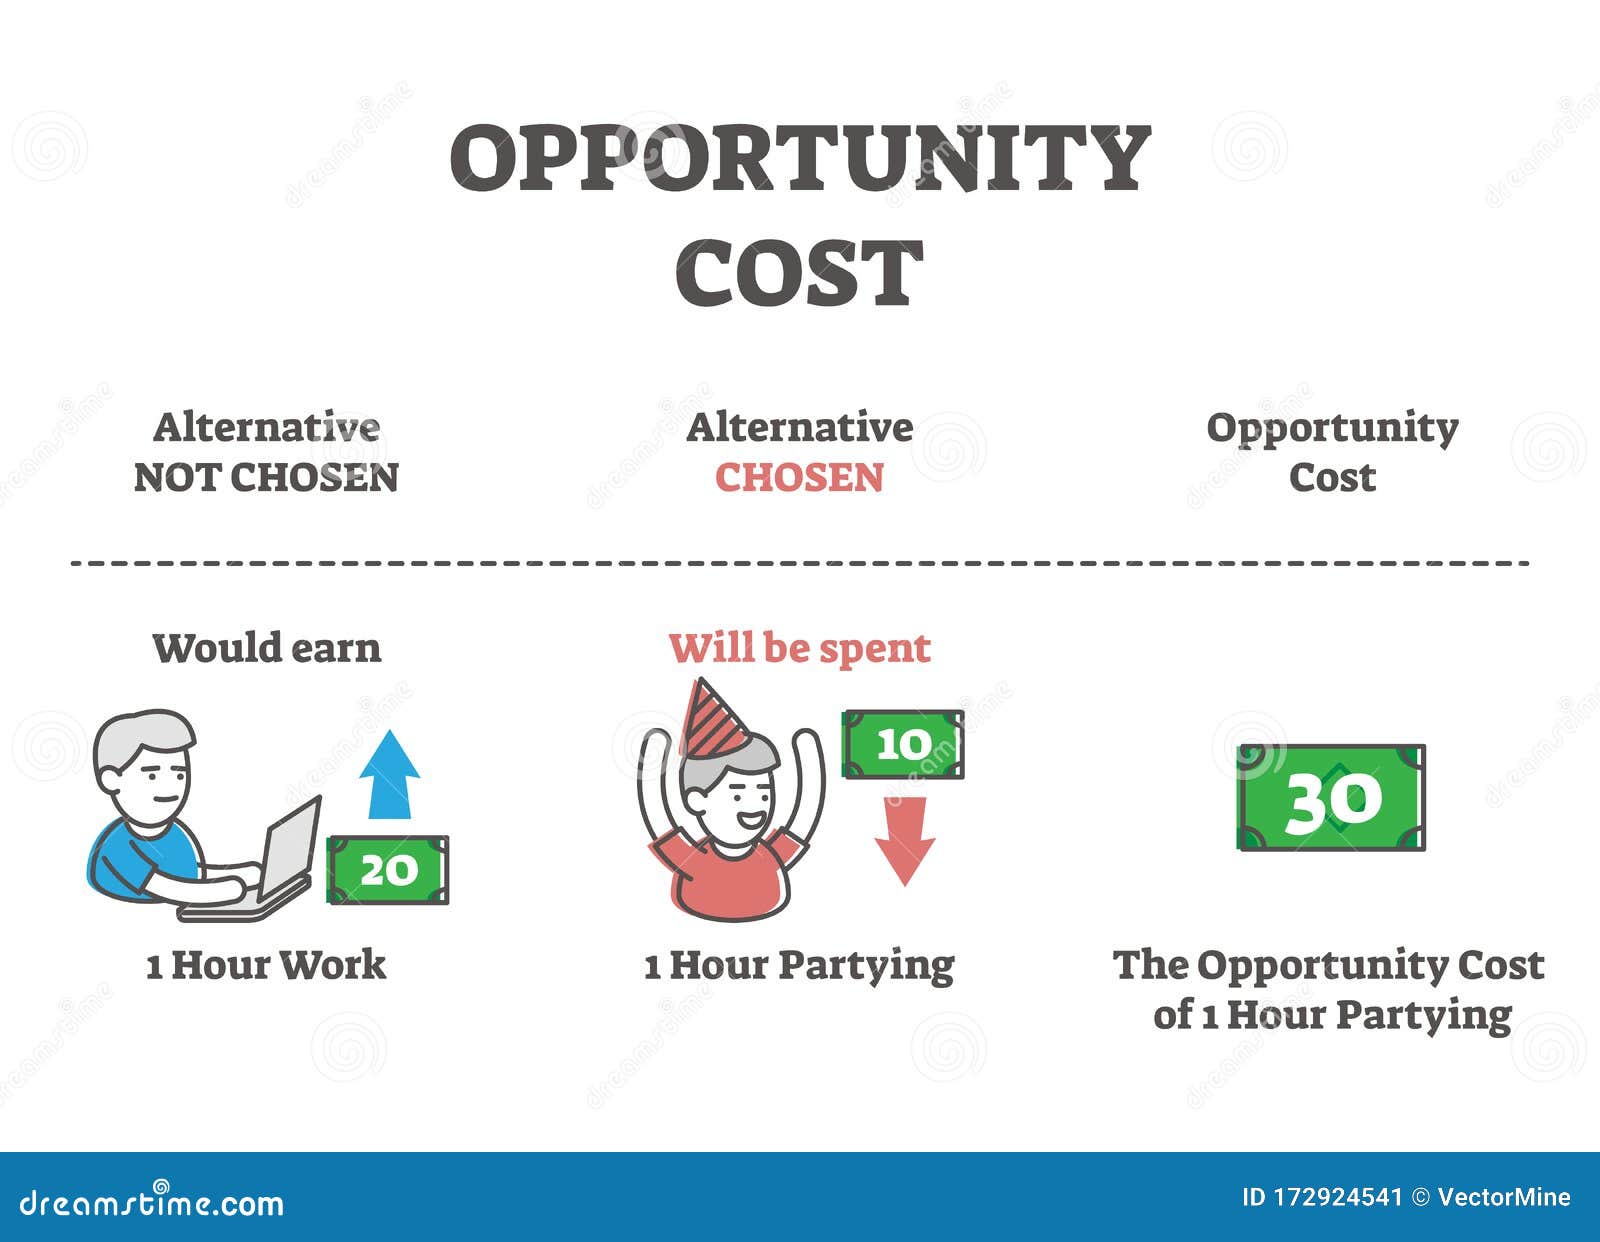 define opportunity cost essay